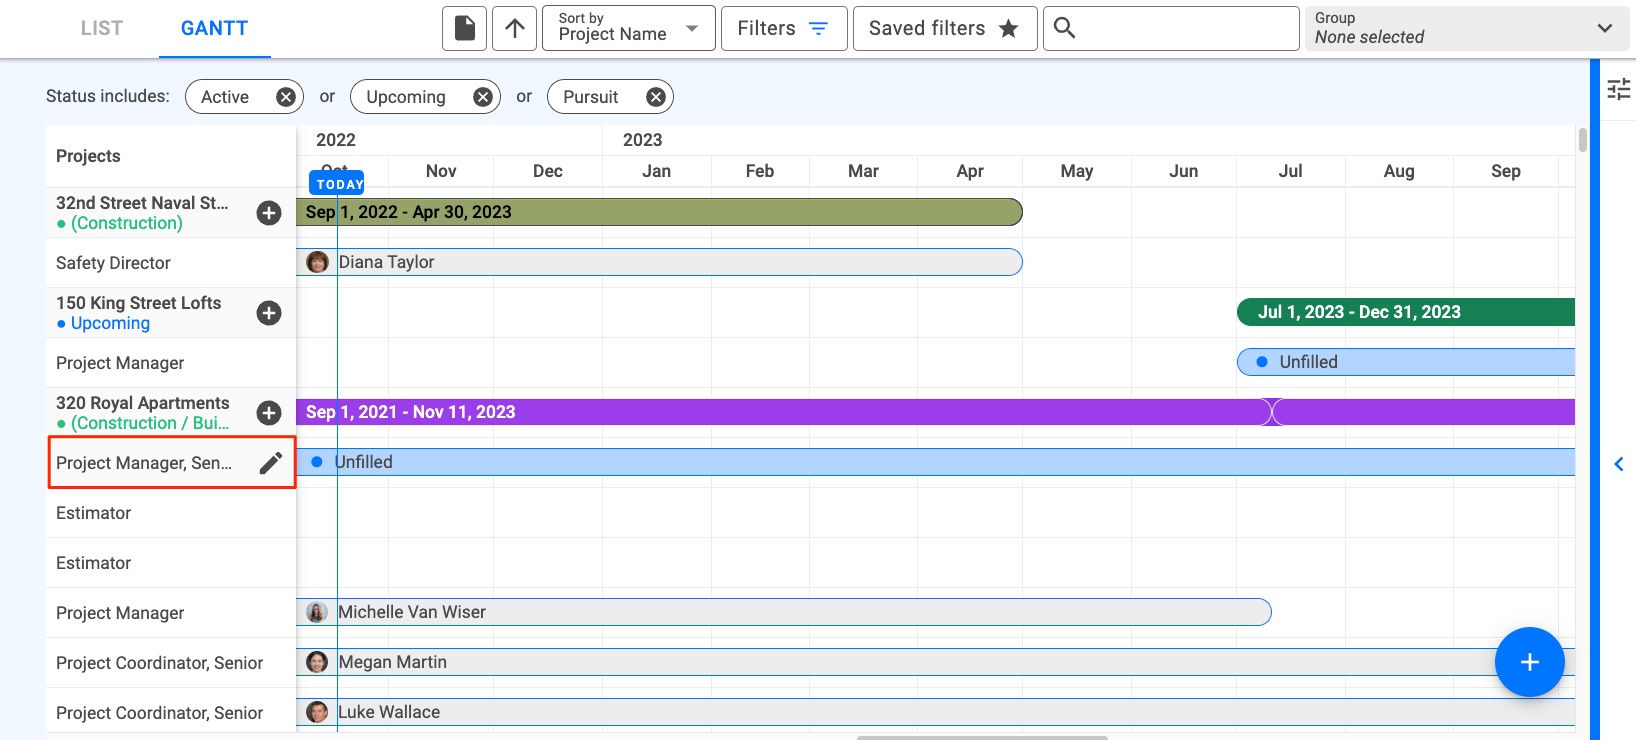 Article_Update_-_Managing_Roles_and_Allocations_From_the_Project_Gantt_-_1_5.jpg